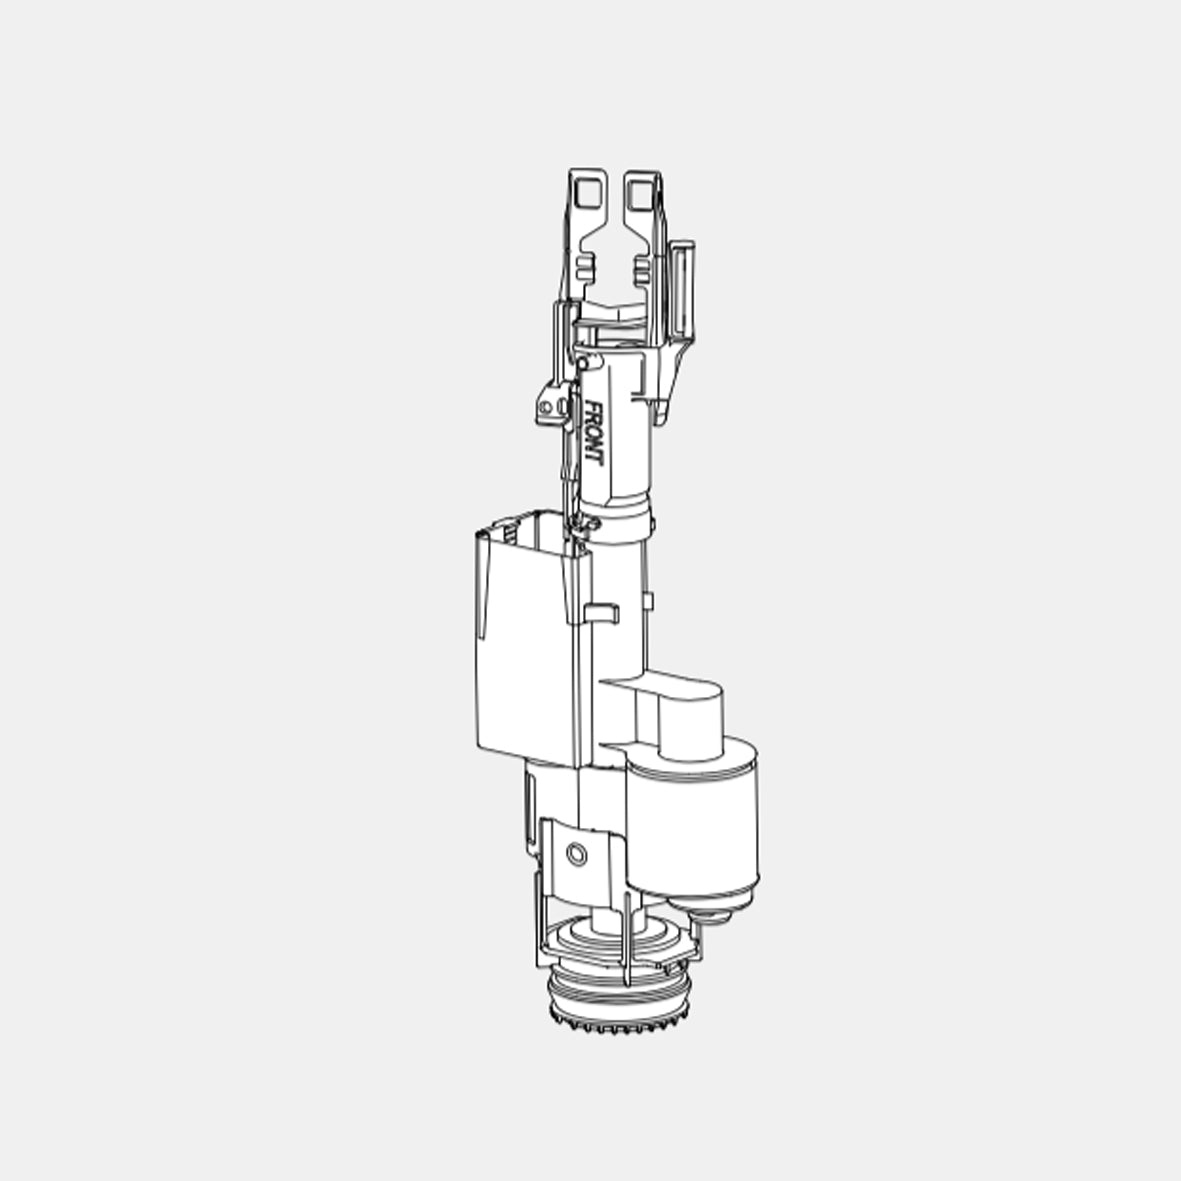 VEROTTI SLIM IN-WALL SPARE PARTS - VS0866690 OUTLET VALVE